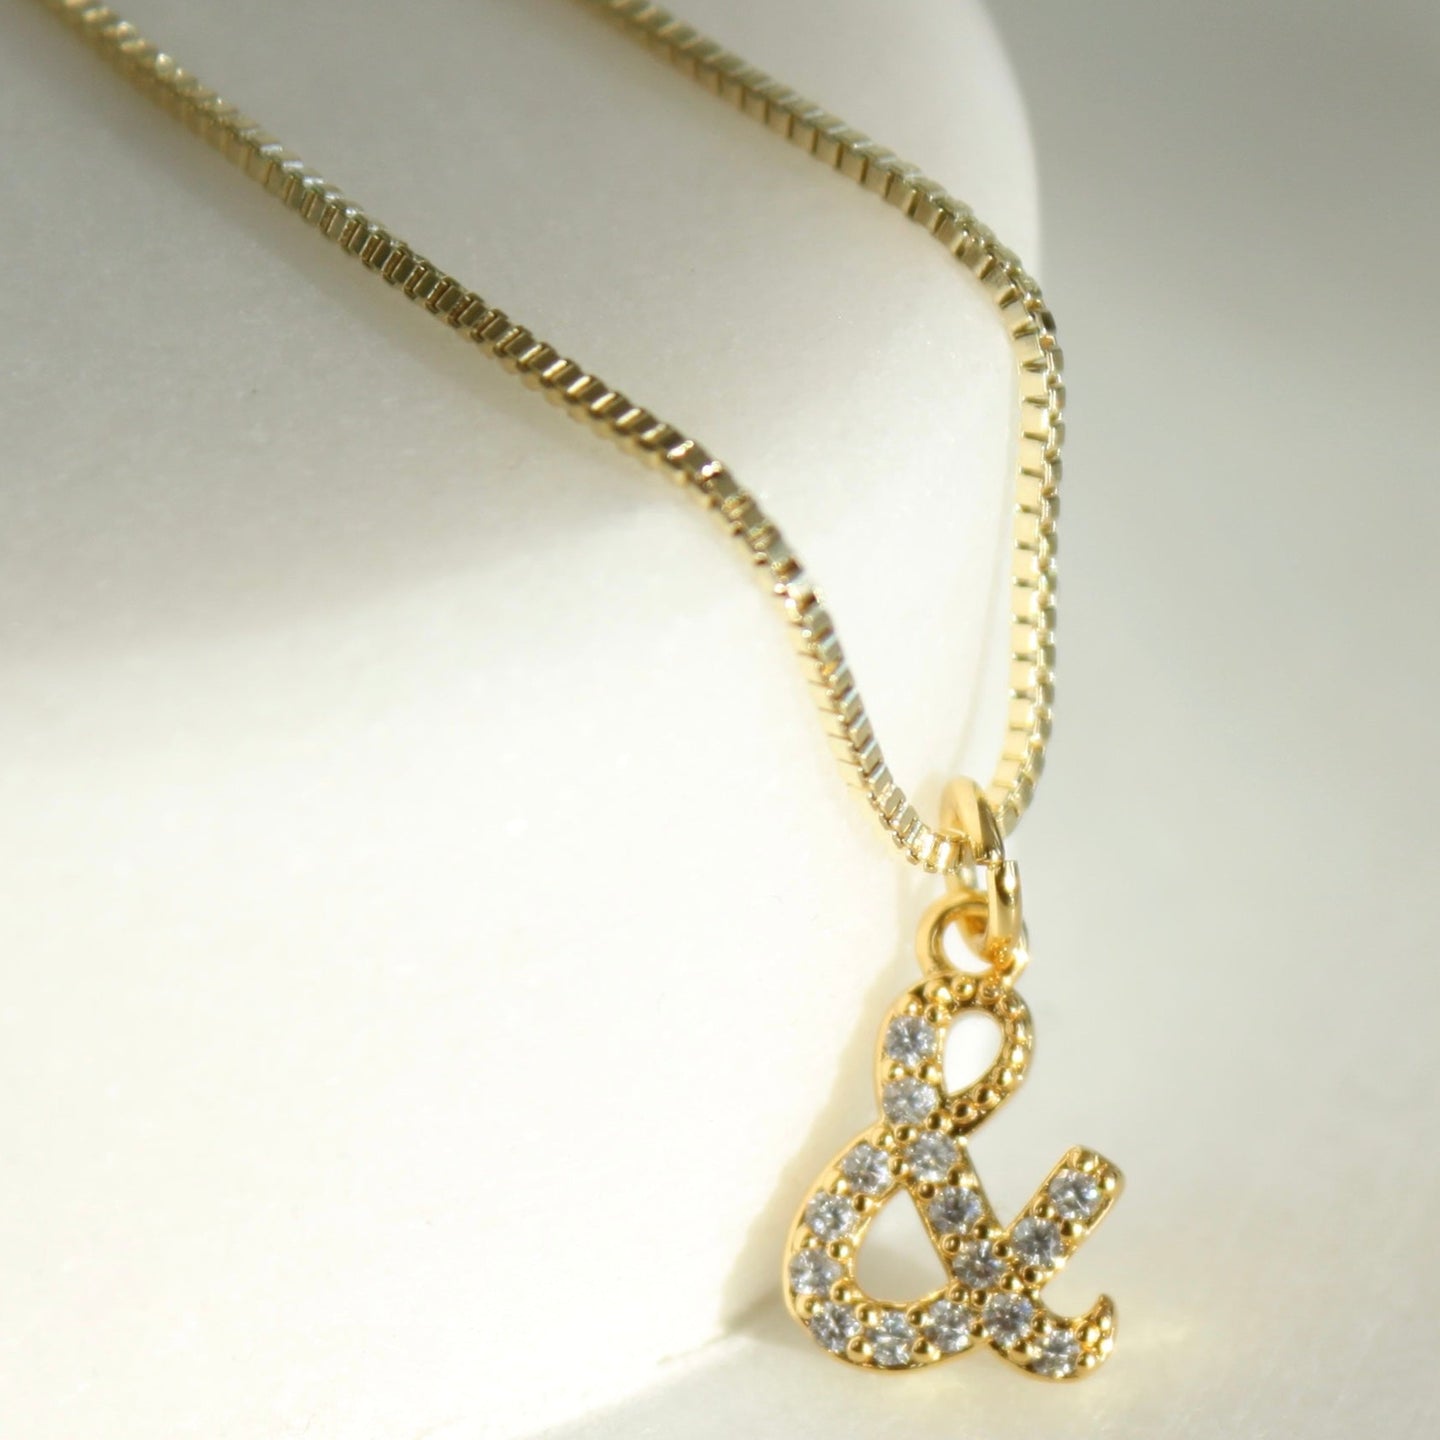 “And” 16” Gold Filled Necklace